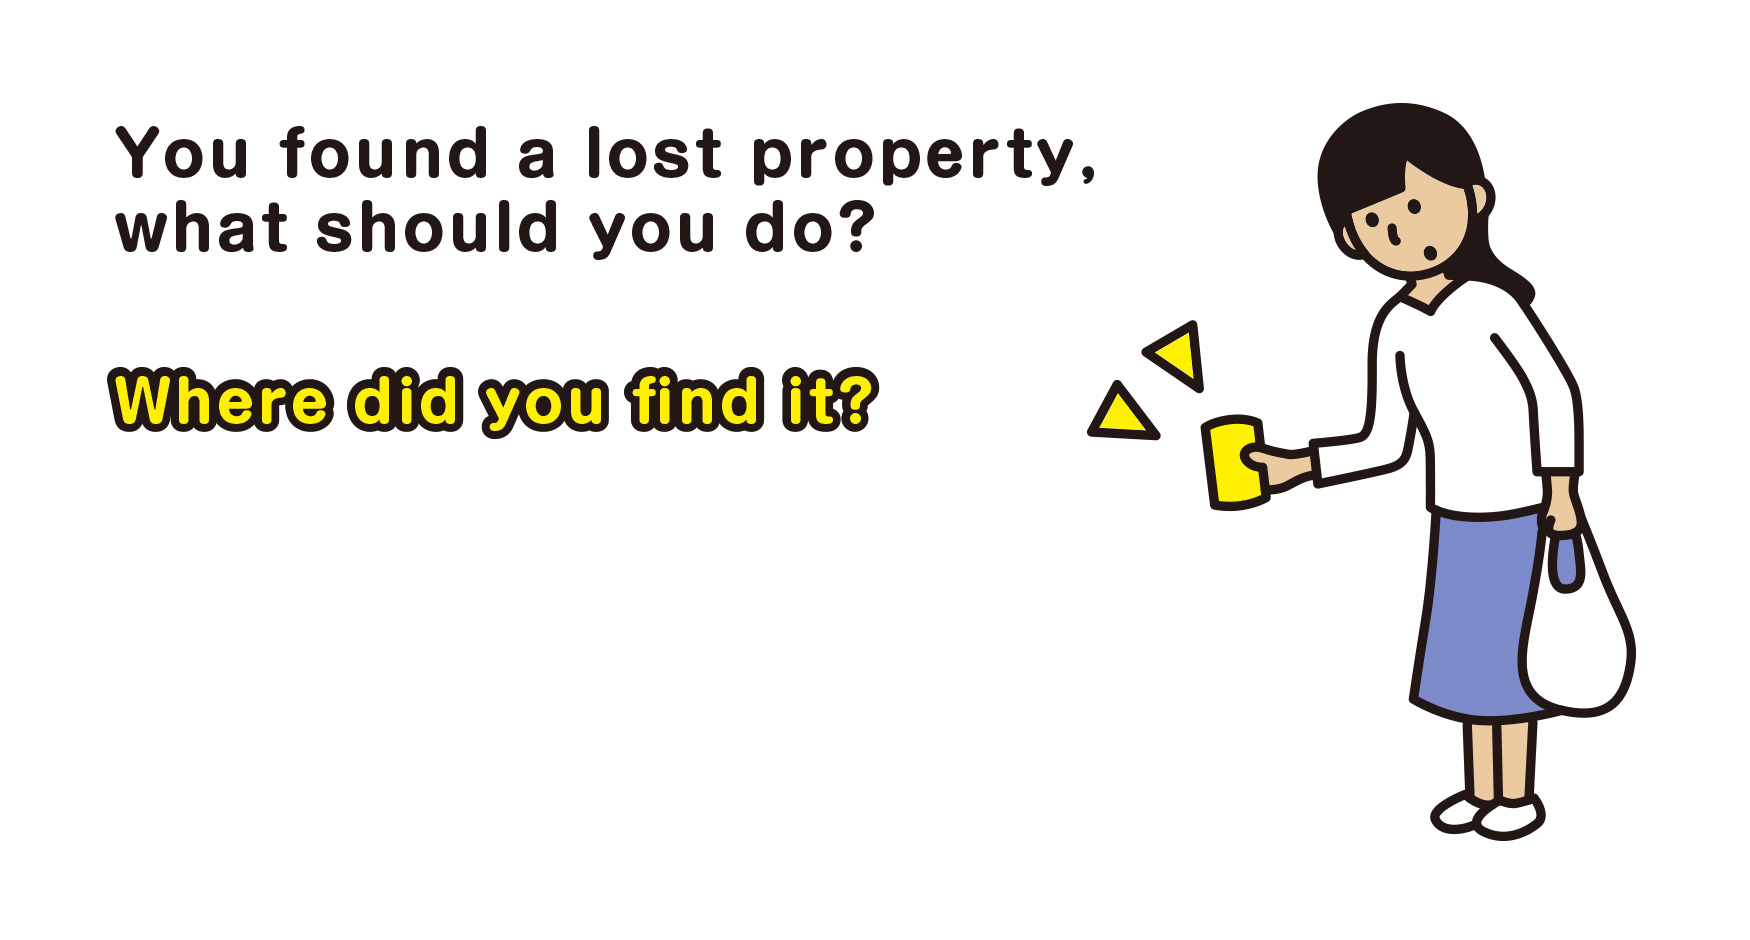 You found a lost property, what should you do?　Where did you find it?